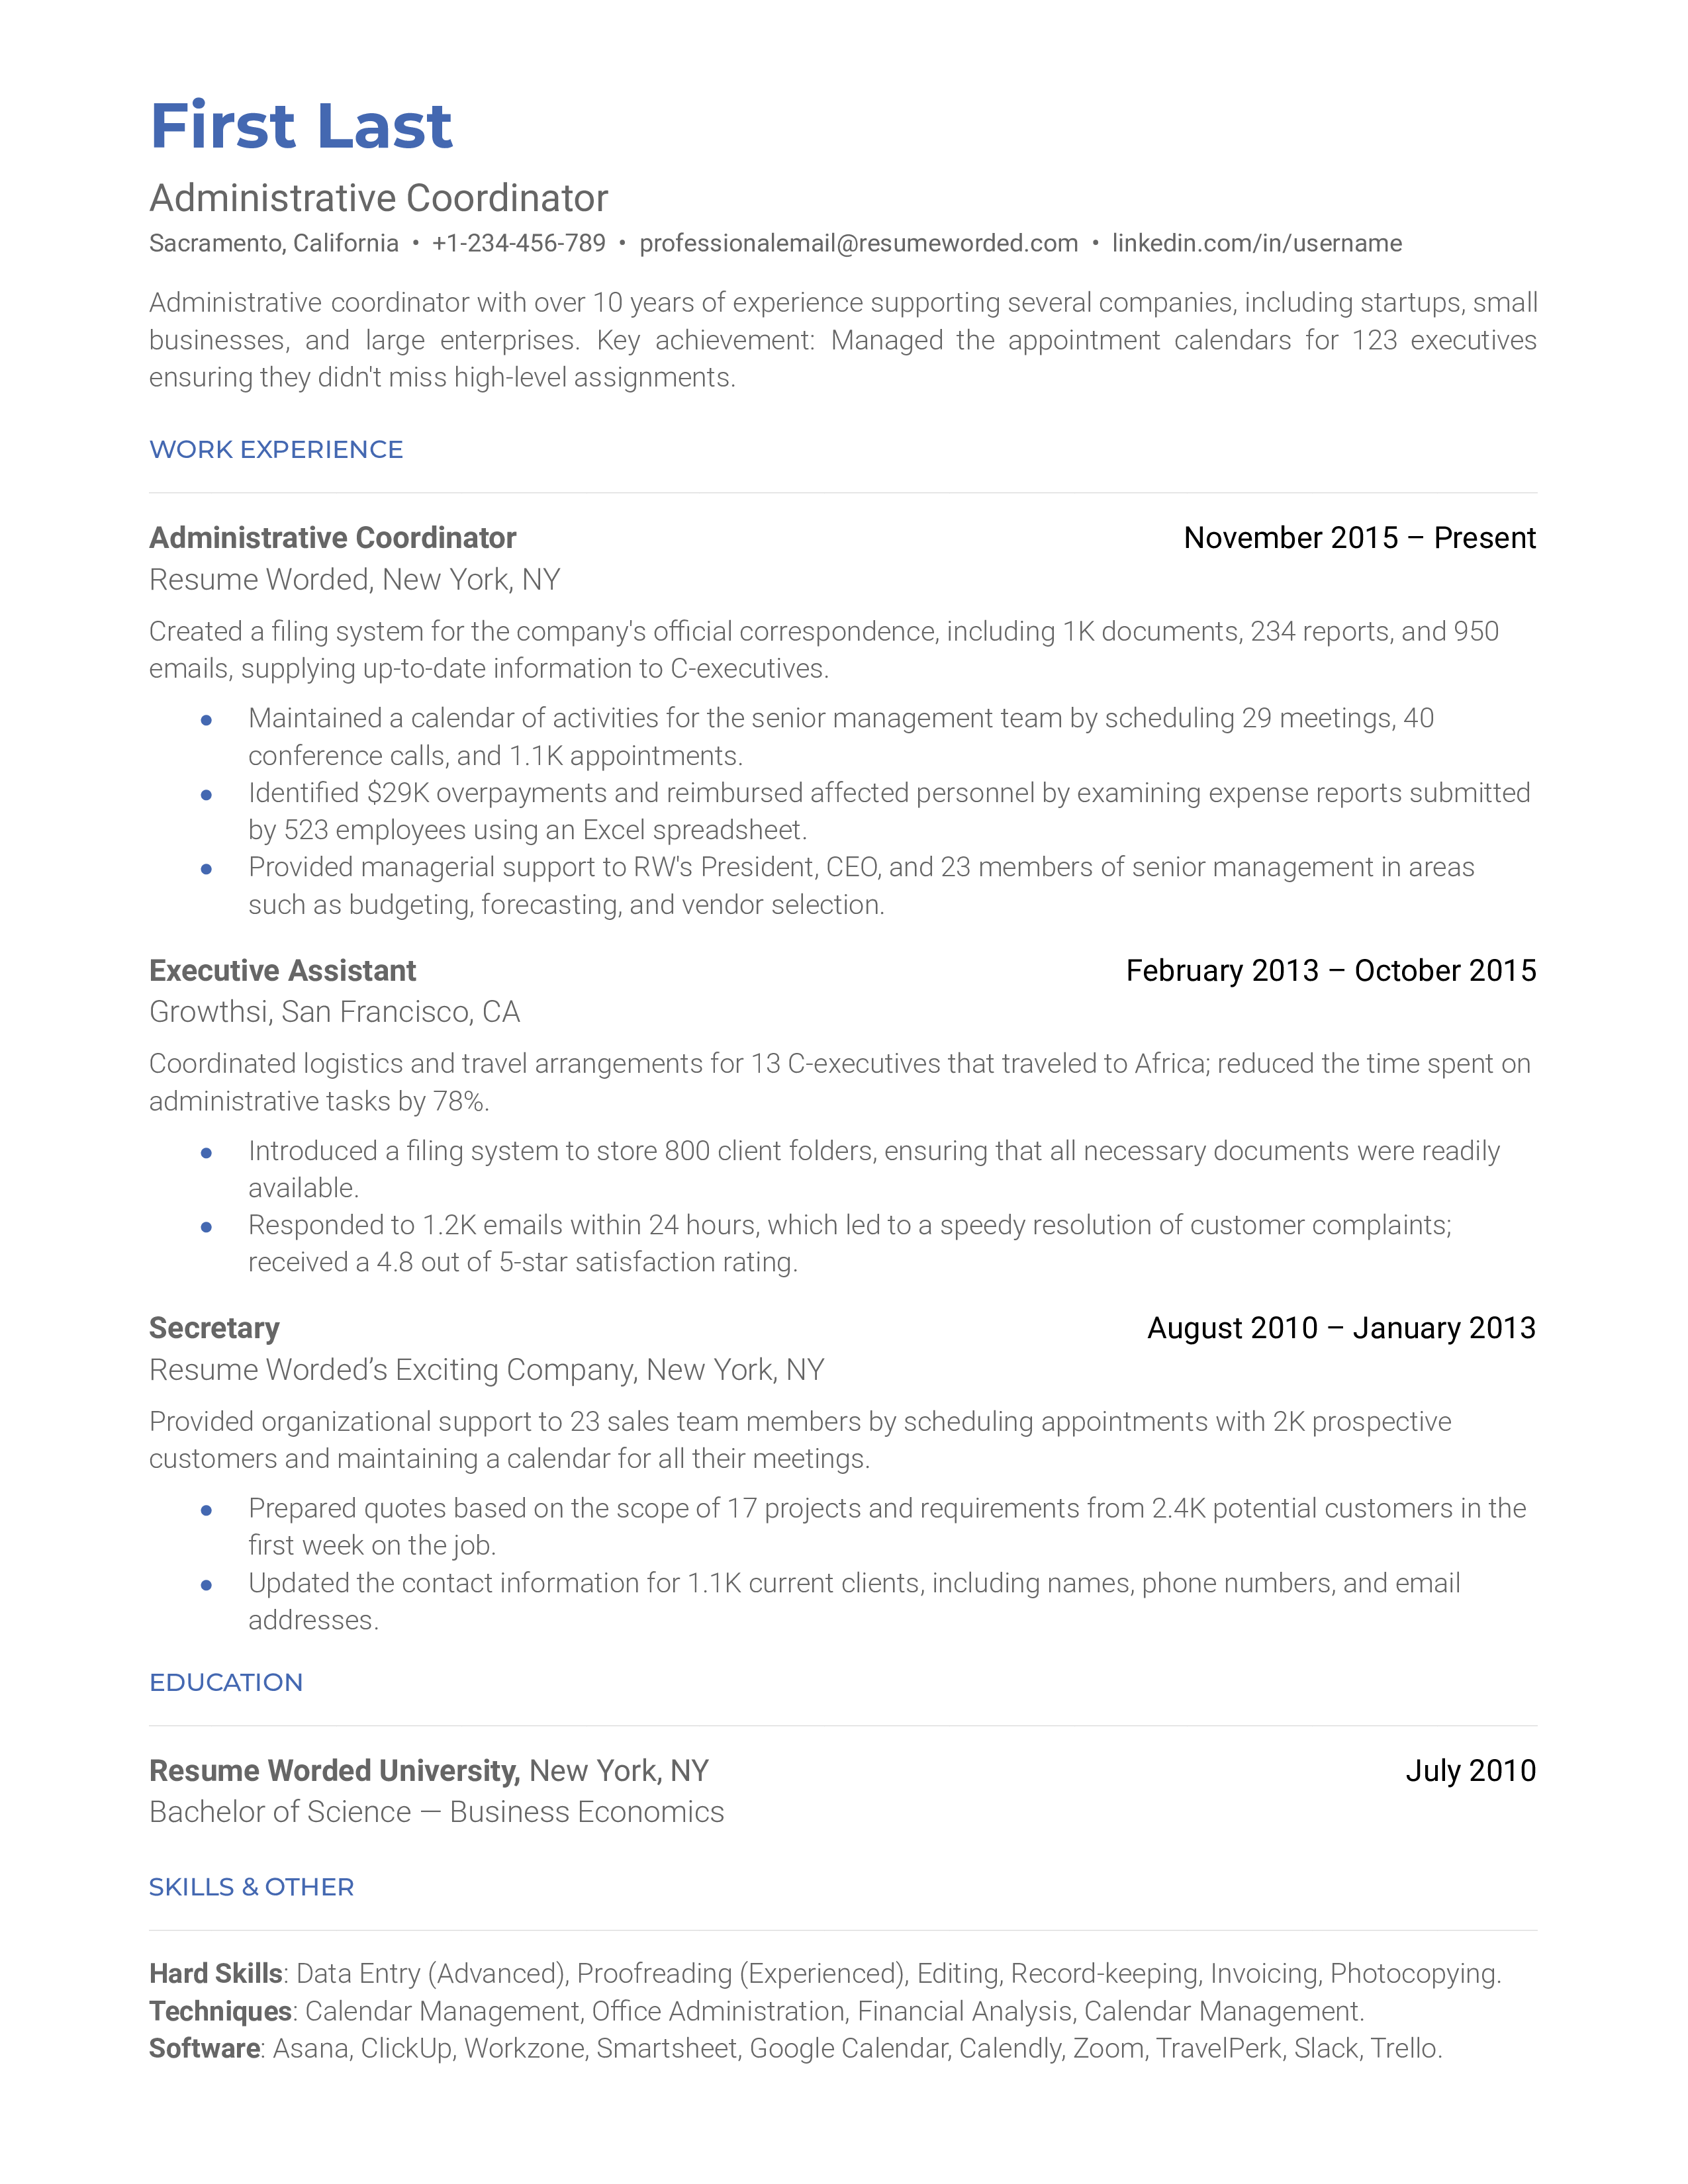 A CV showcasing the skills and experiences relevant to an Administrative Coordinator position.